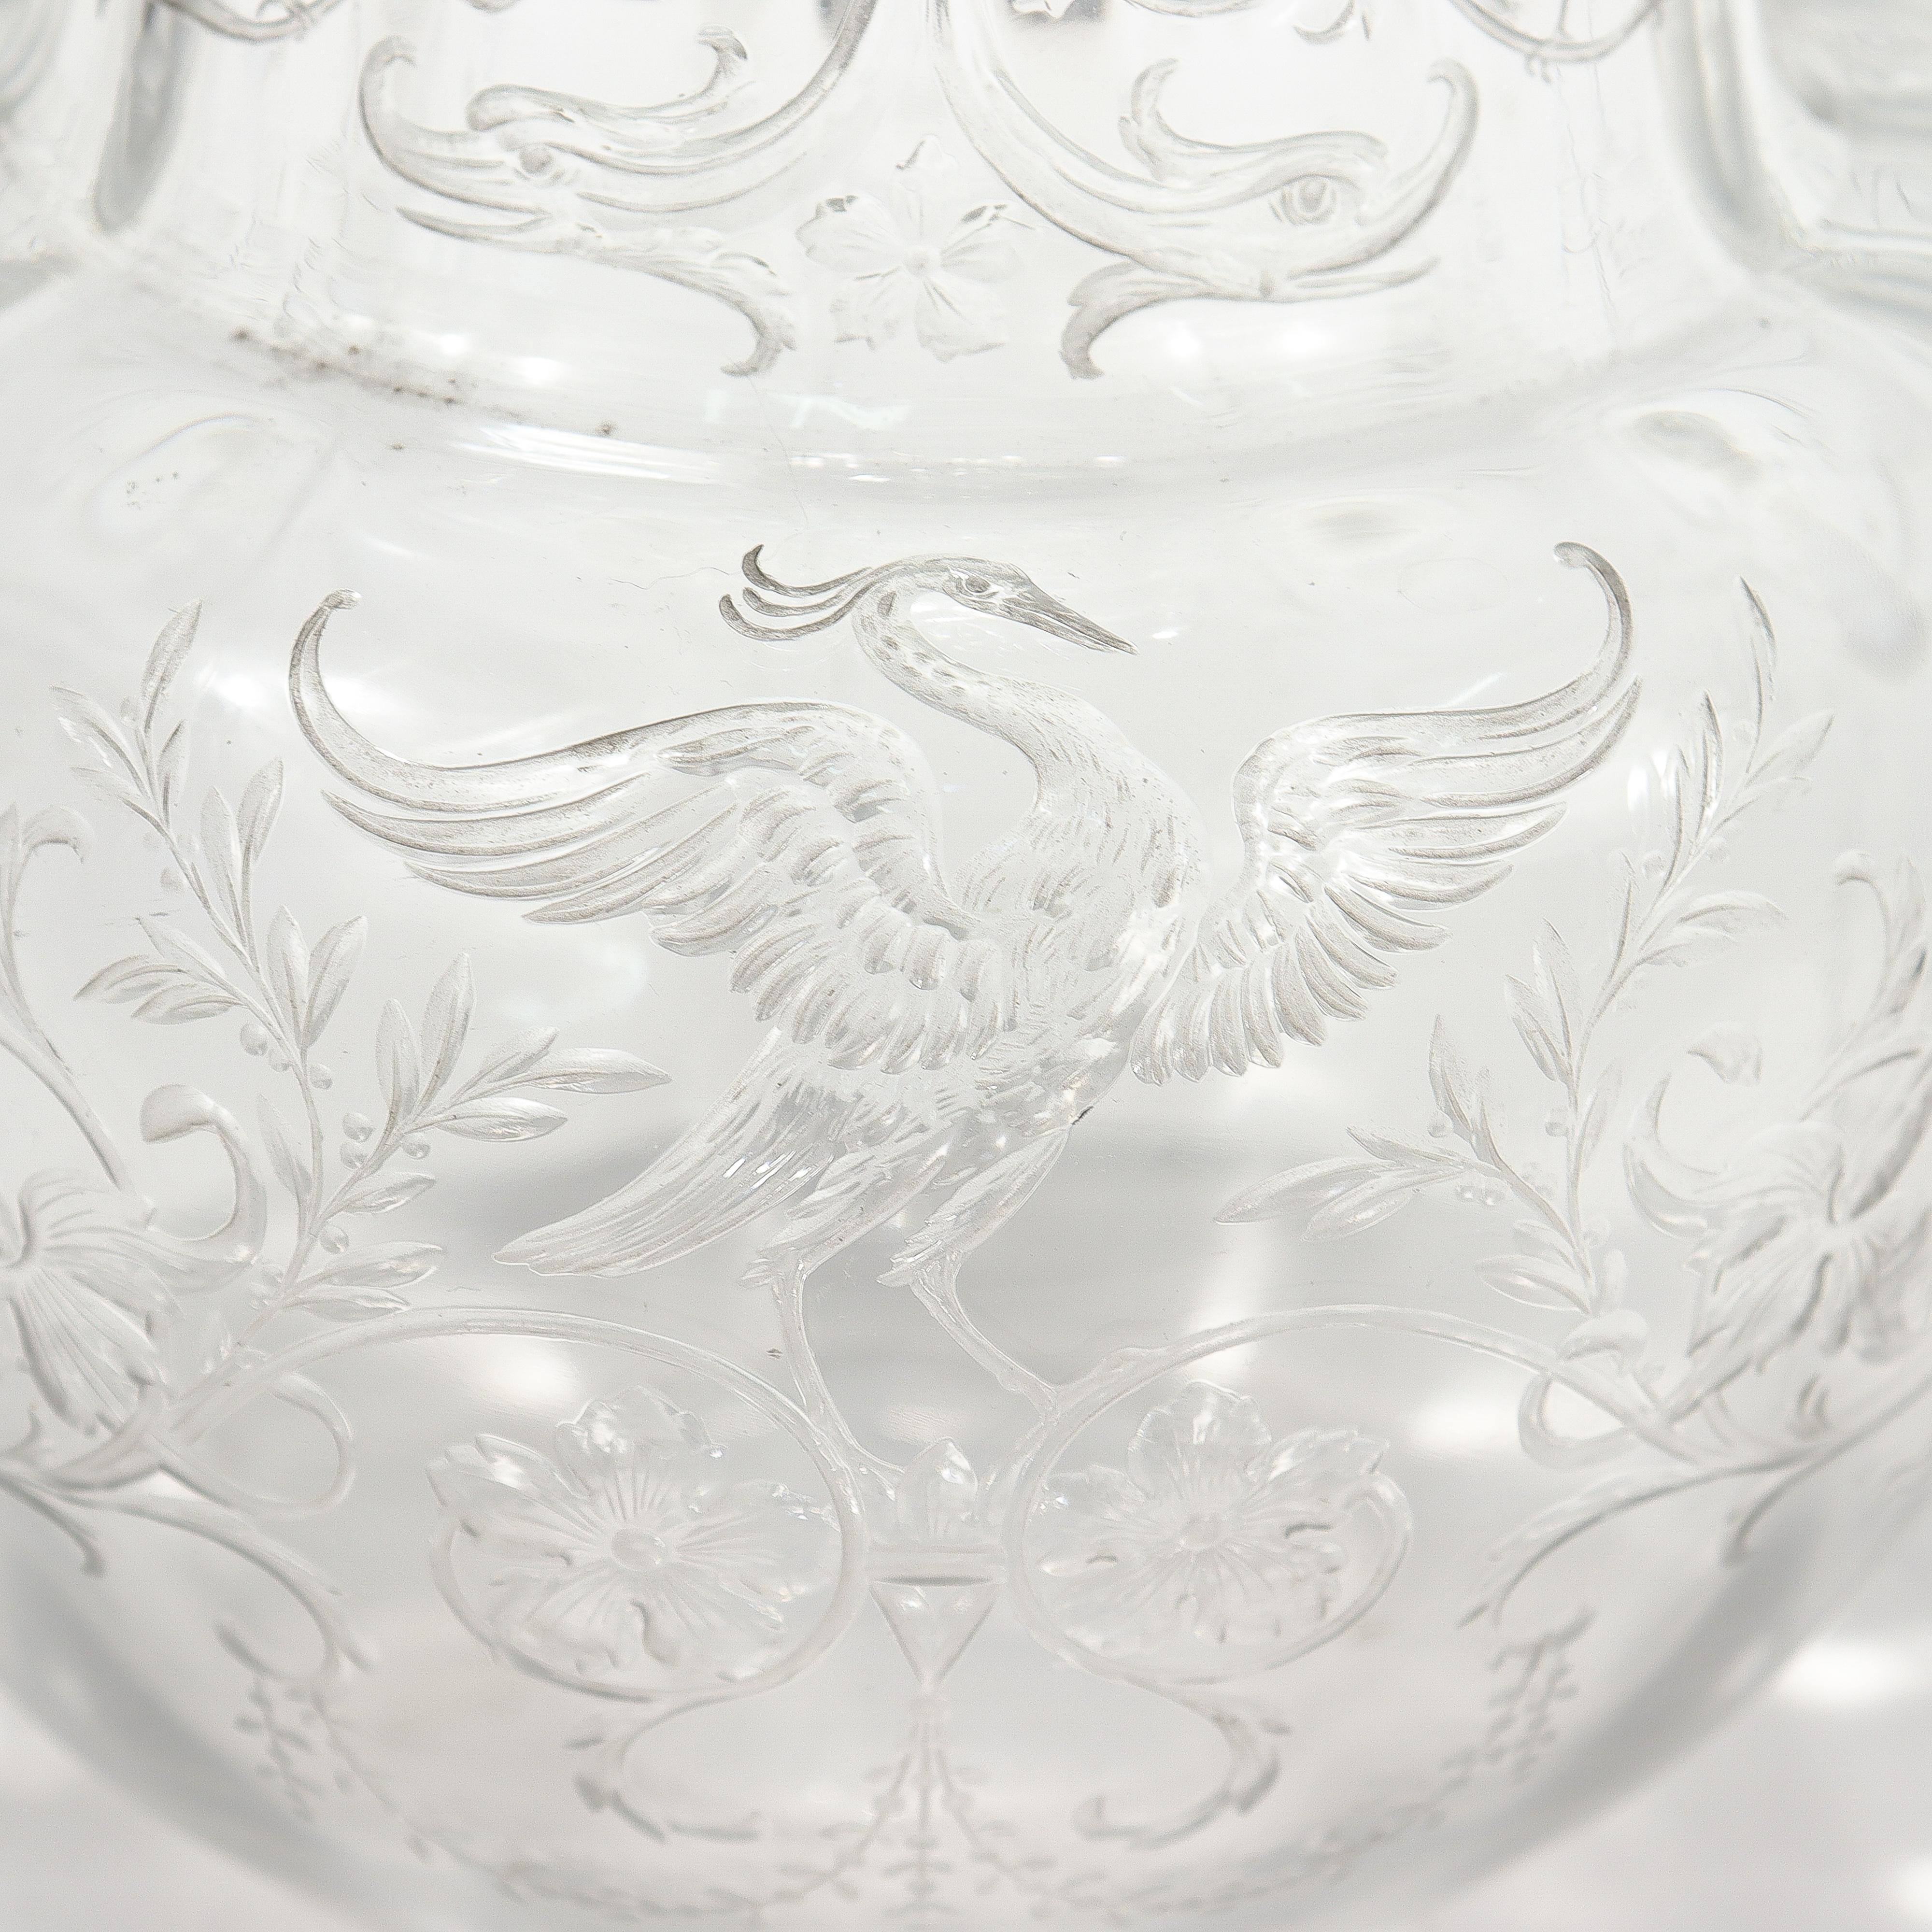 Antique Cut Glass Pitcher with Birds & Phoenix Attributed to Stevens & Williams For Sale 6